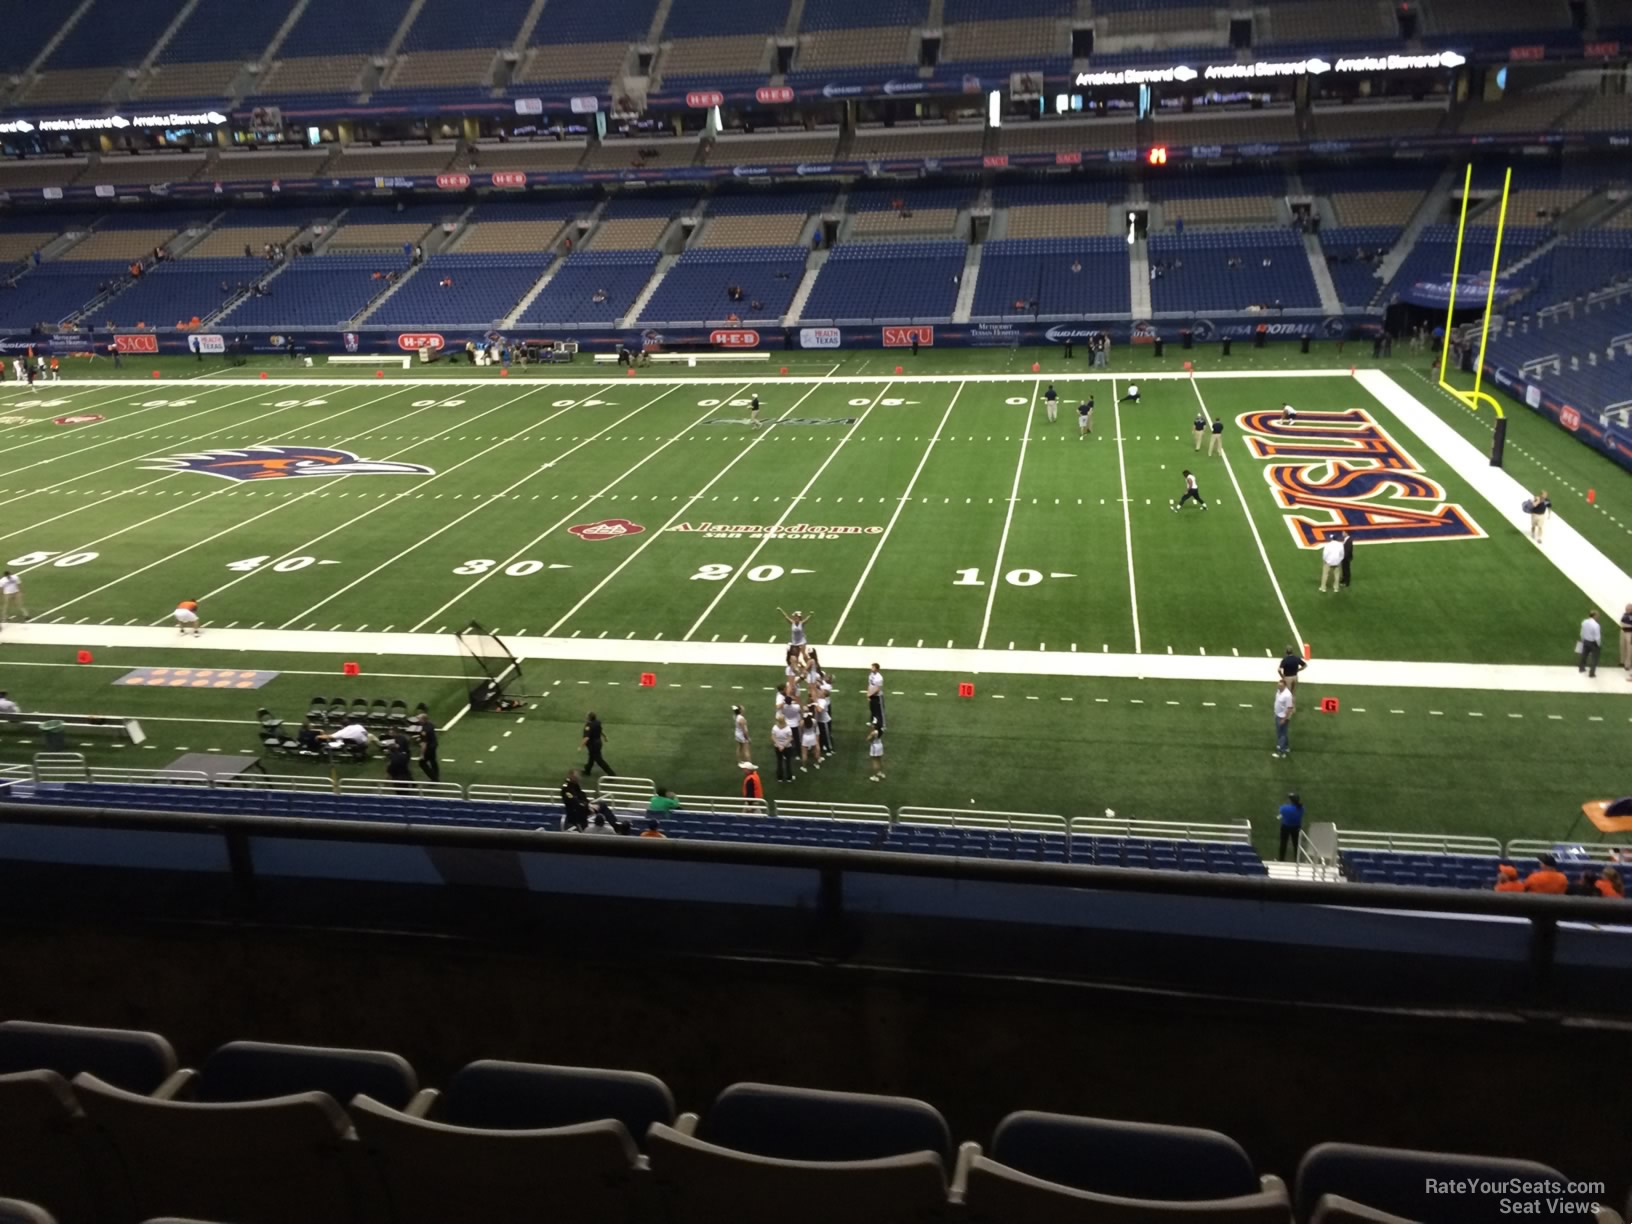 section 209, row 5 seat view  for football - alamodome